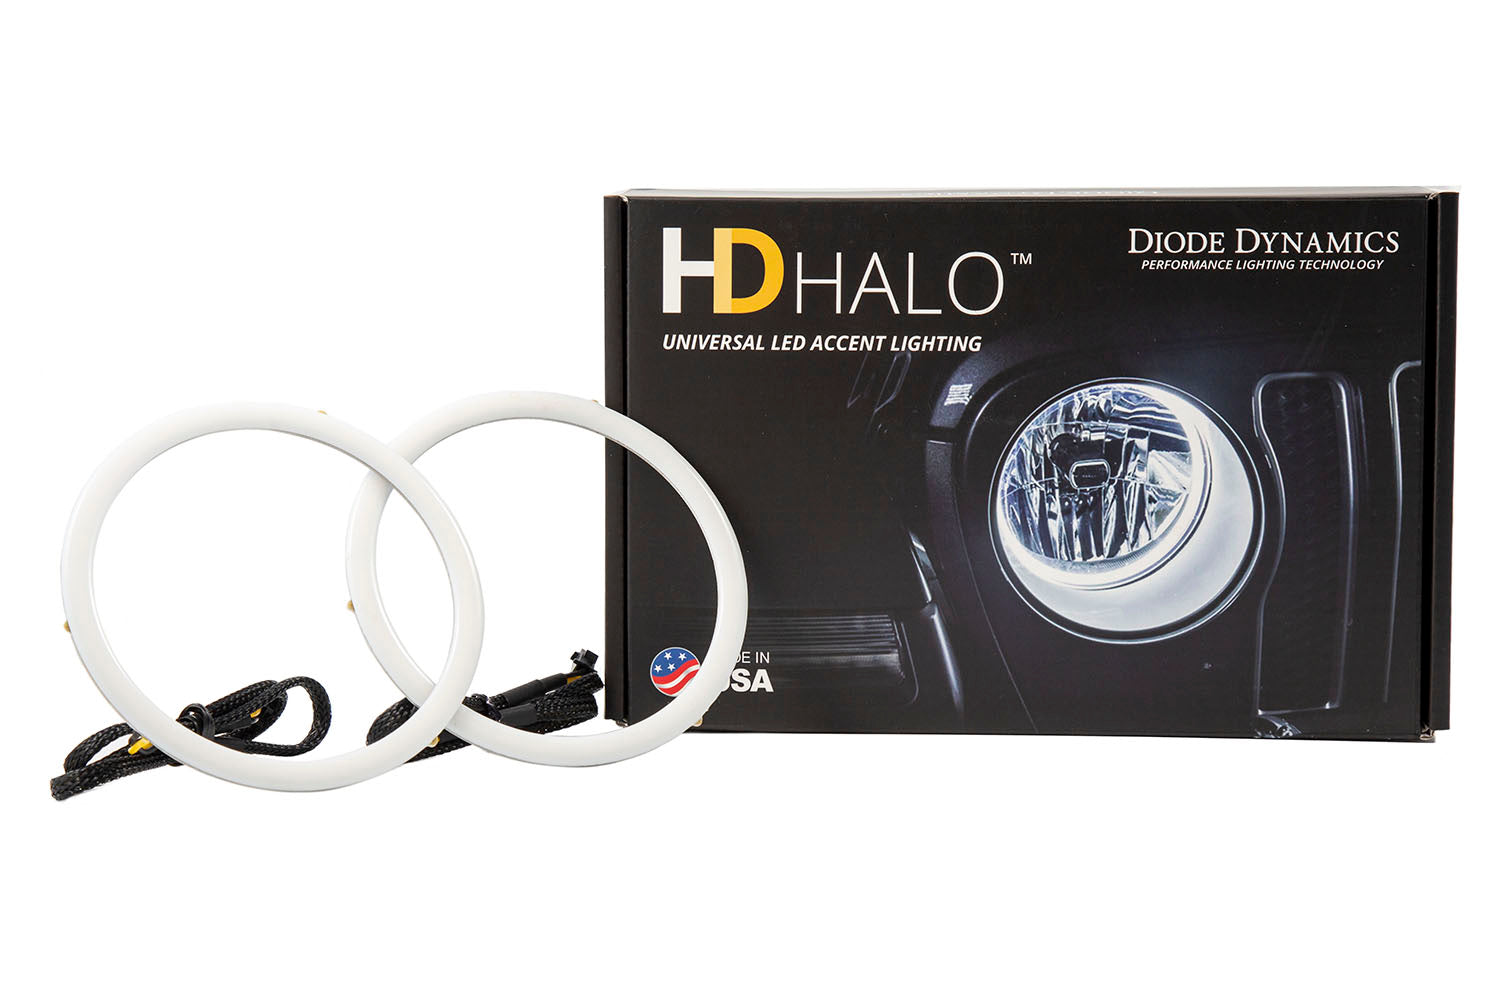 Halo Lights LED 50mm Red Pair Diode Dynamics